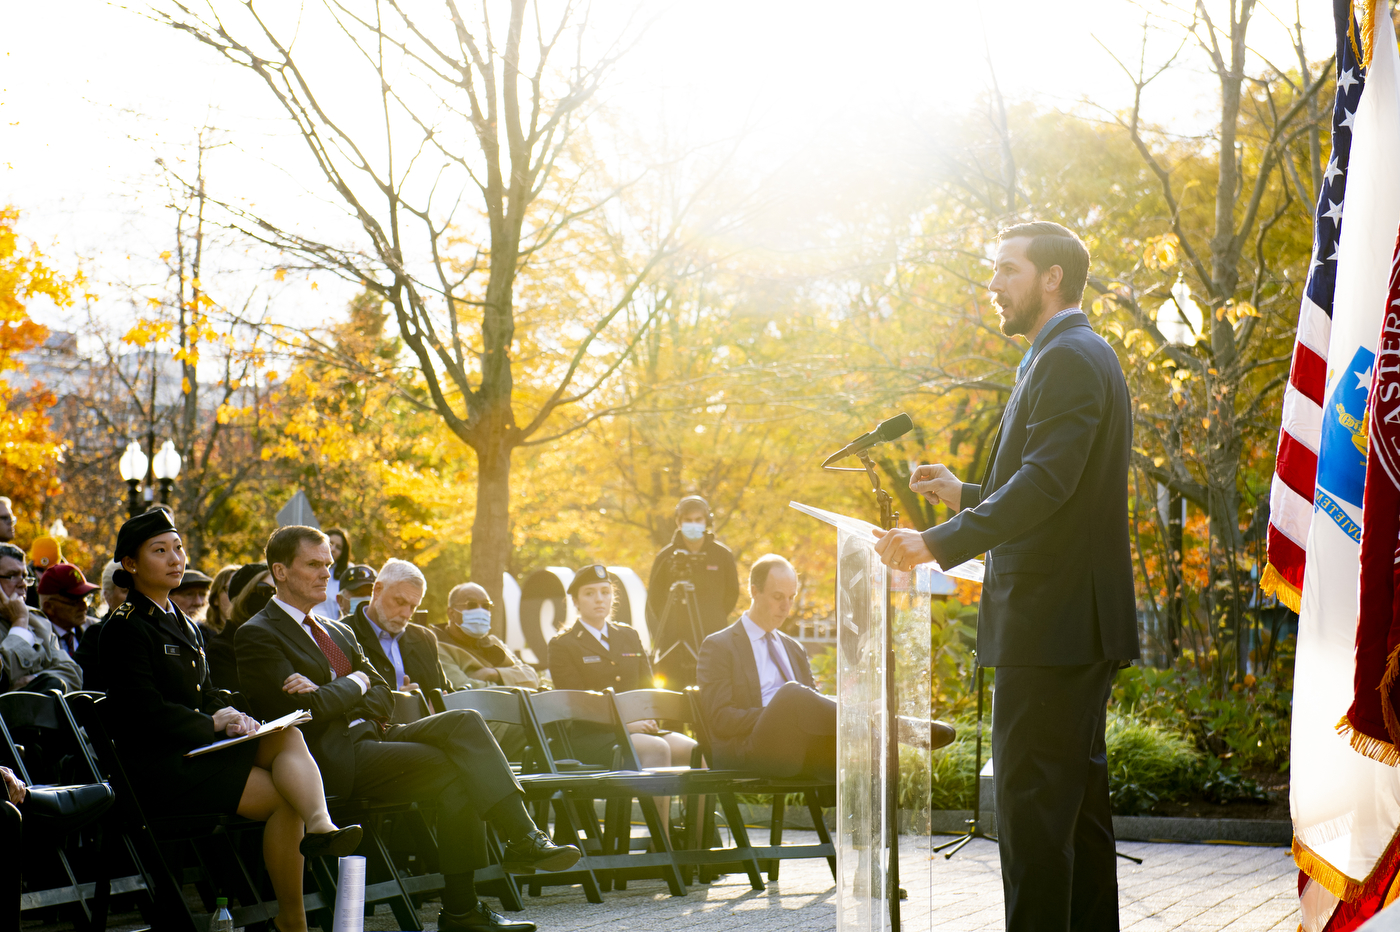 man in suit and tie stands at podium speaking to an audience